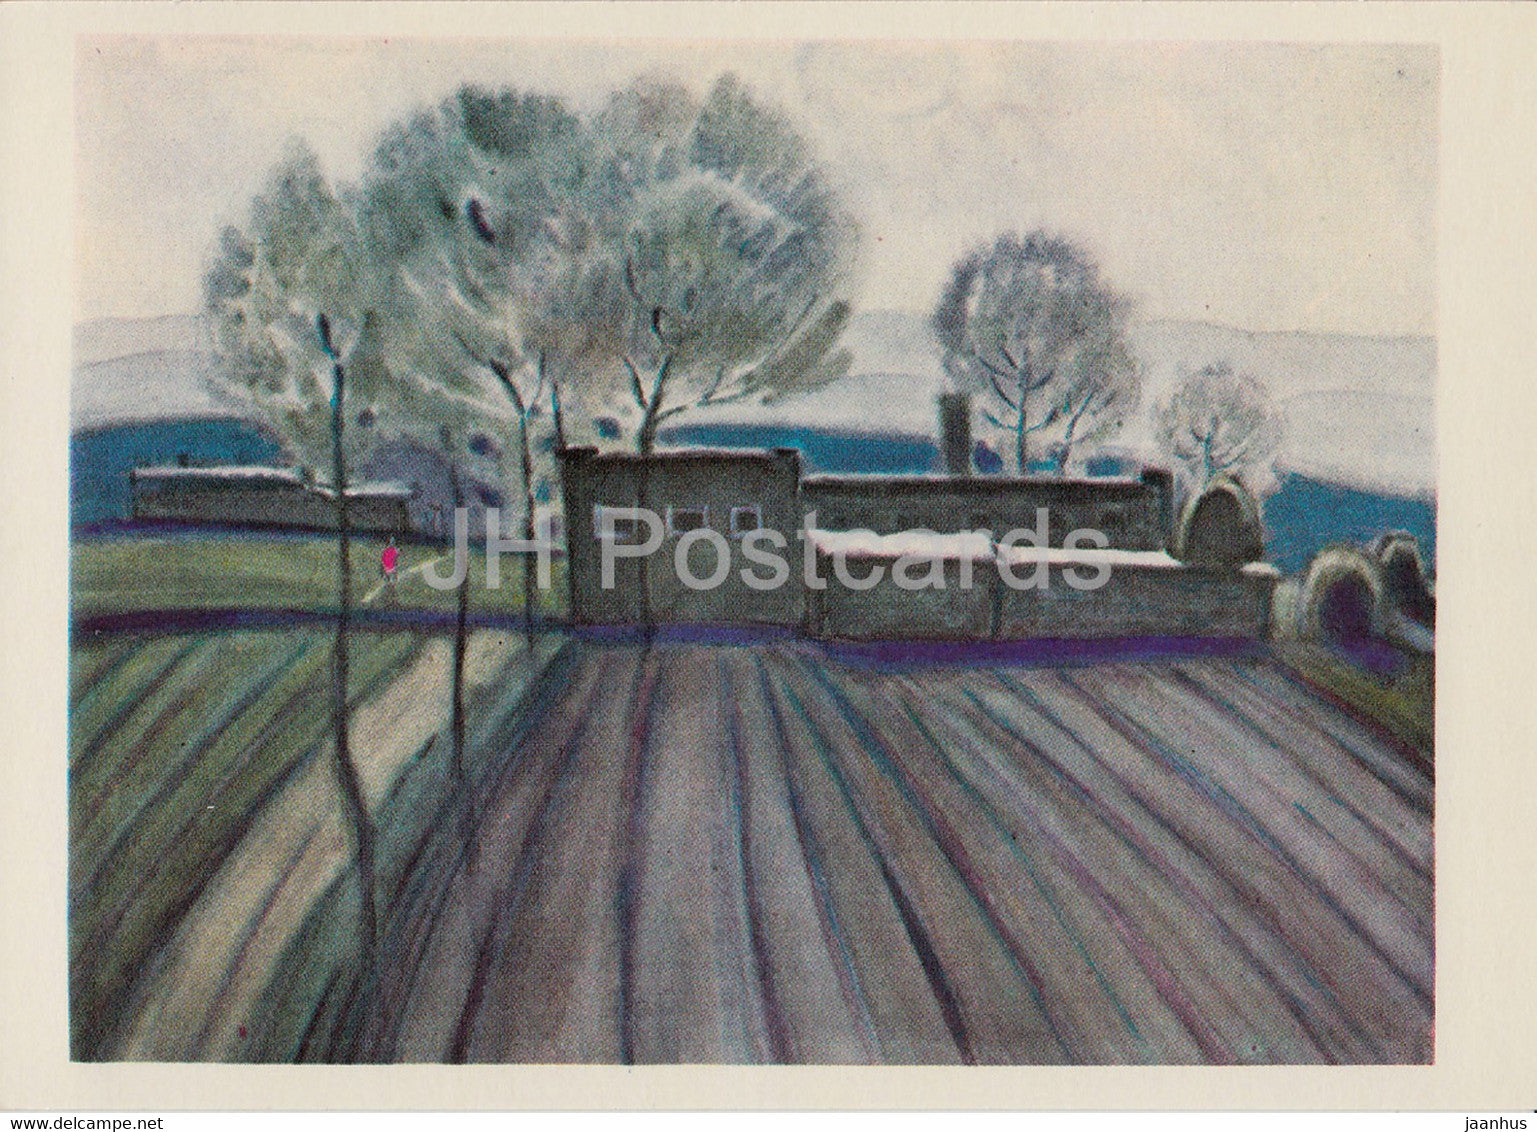 across Kyrgyzstan by V. Rogachev - Plue Day - illustration - 1979 - Russia USSR - unused - JH Postcards